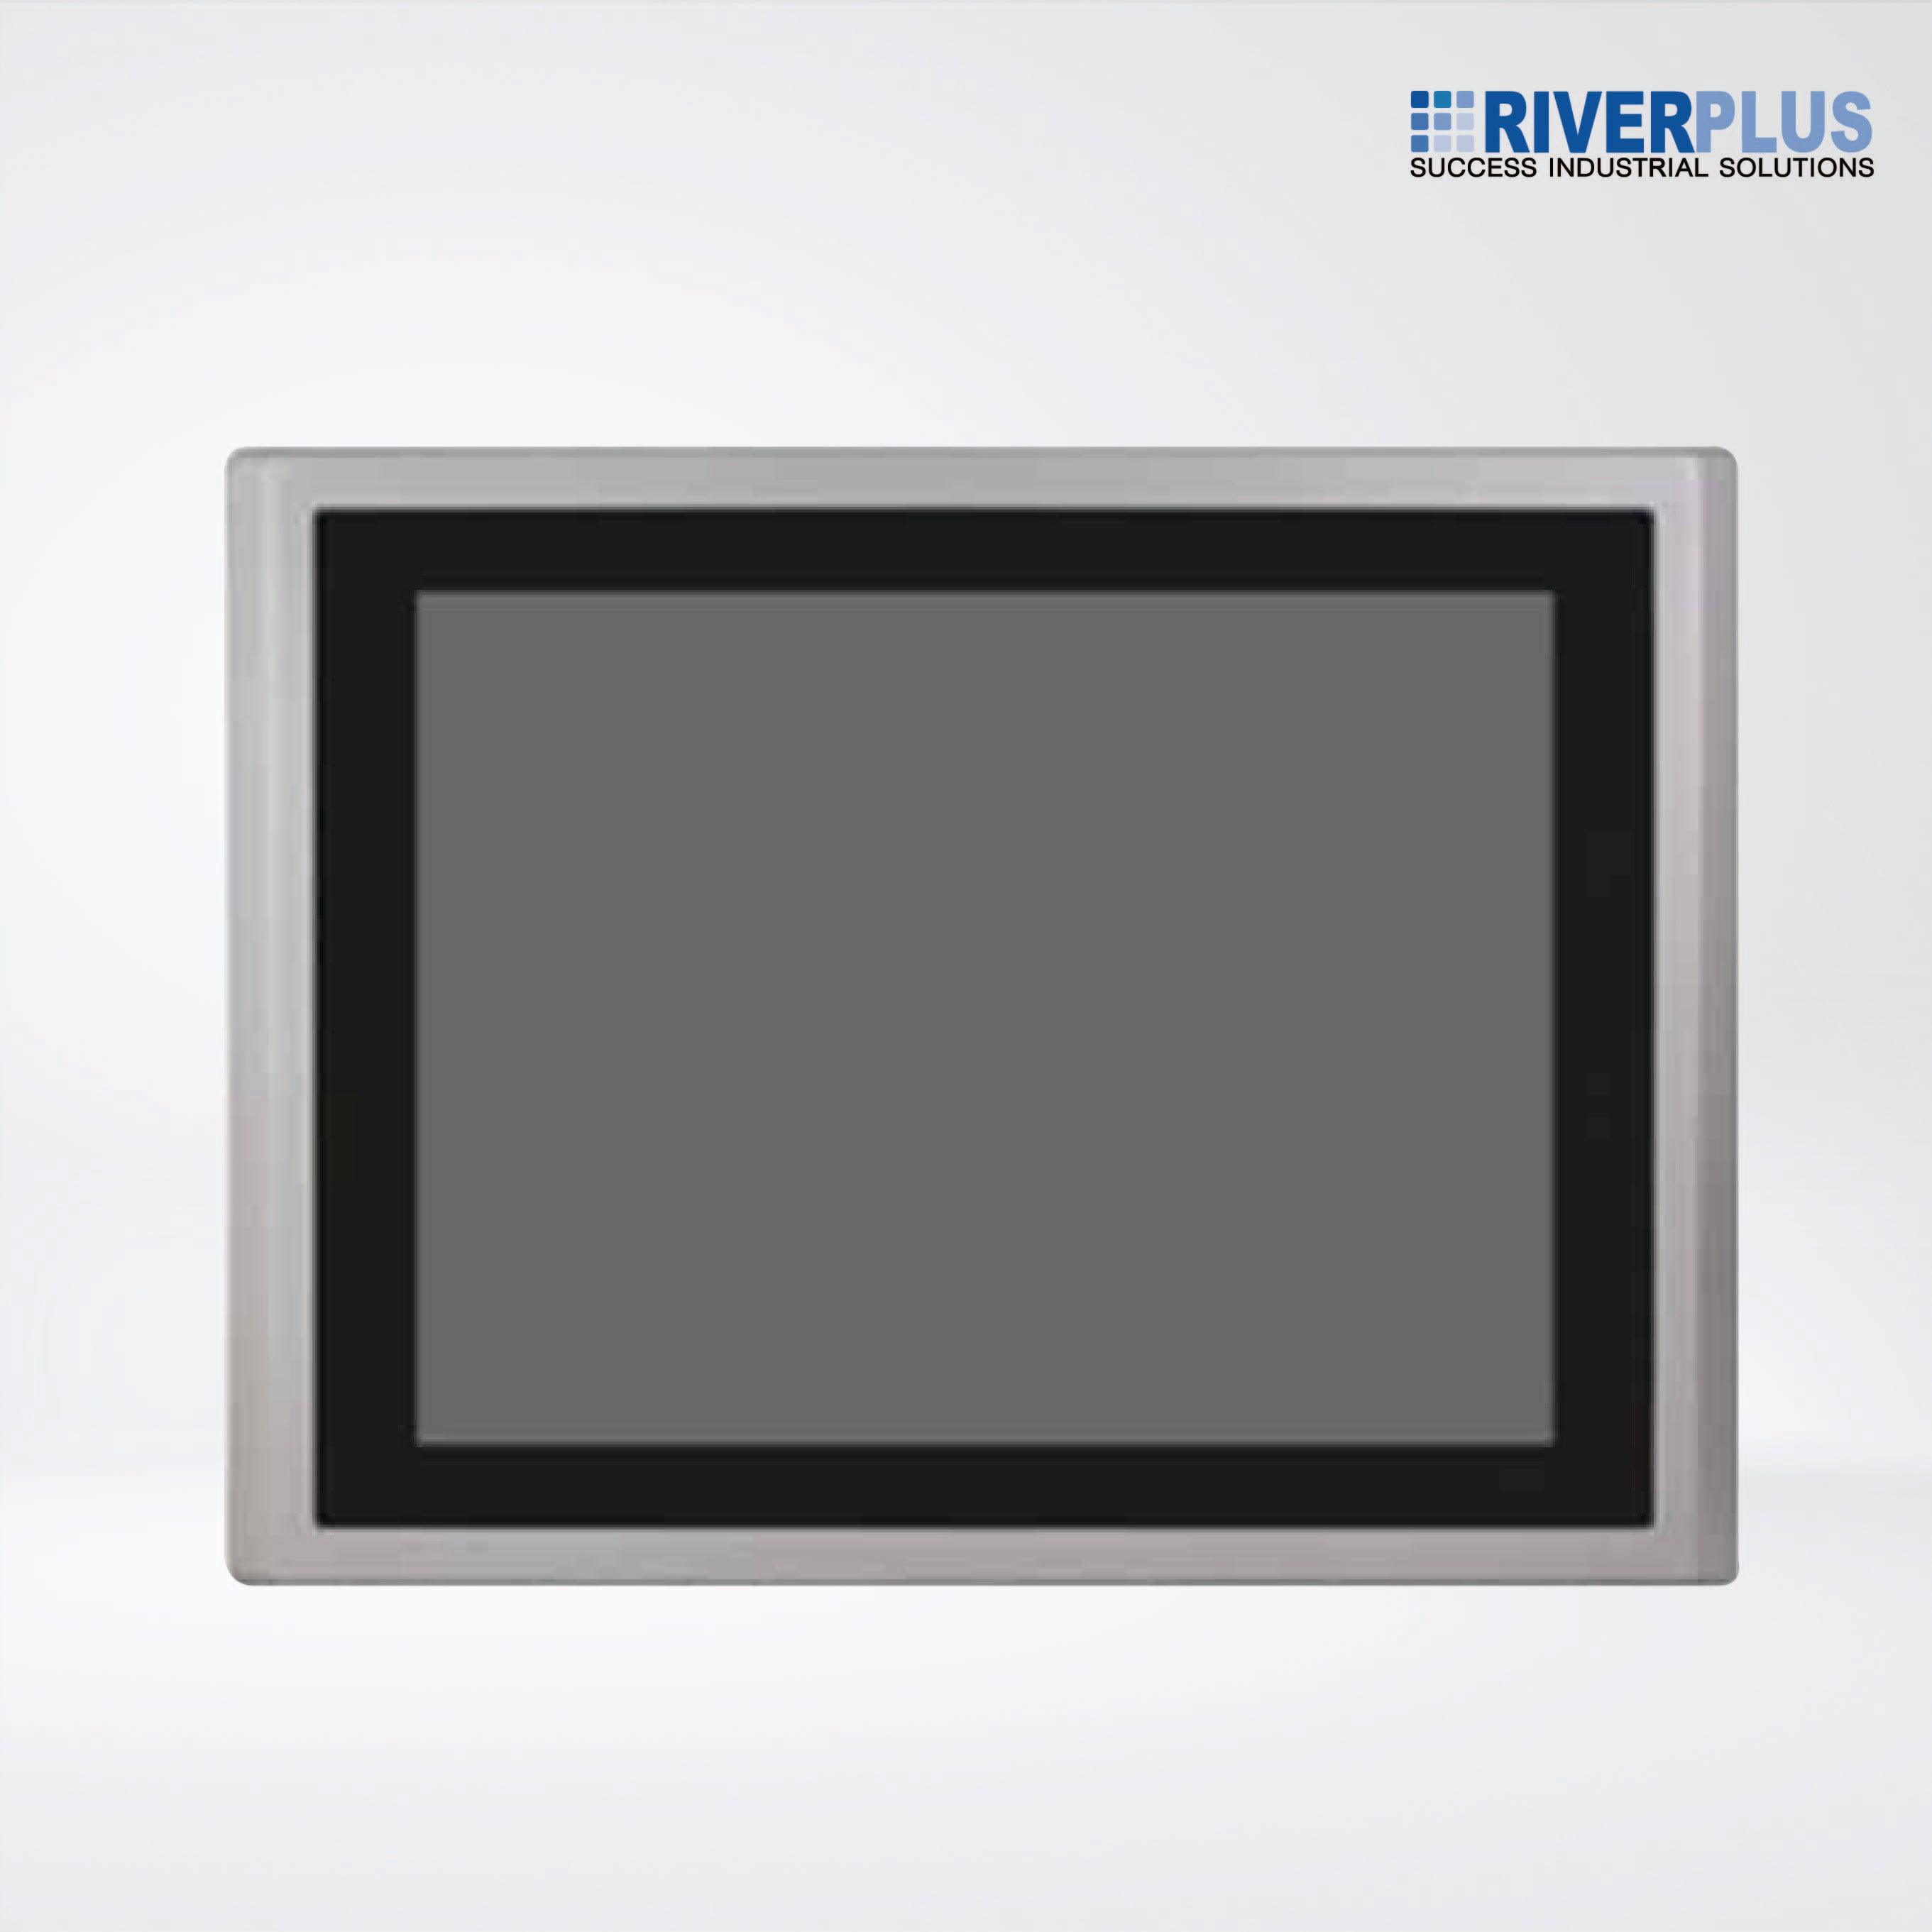 ARCHMI-815 New Generation Low Power Consumption HMI/Innovationg Fast, Bay Trail Solution - Riverplus